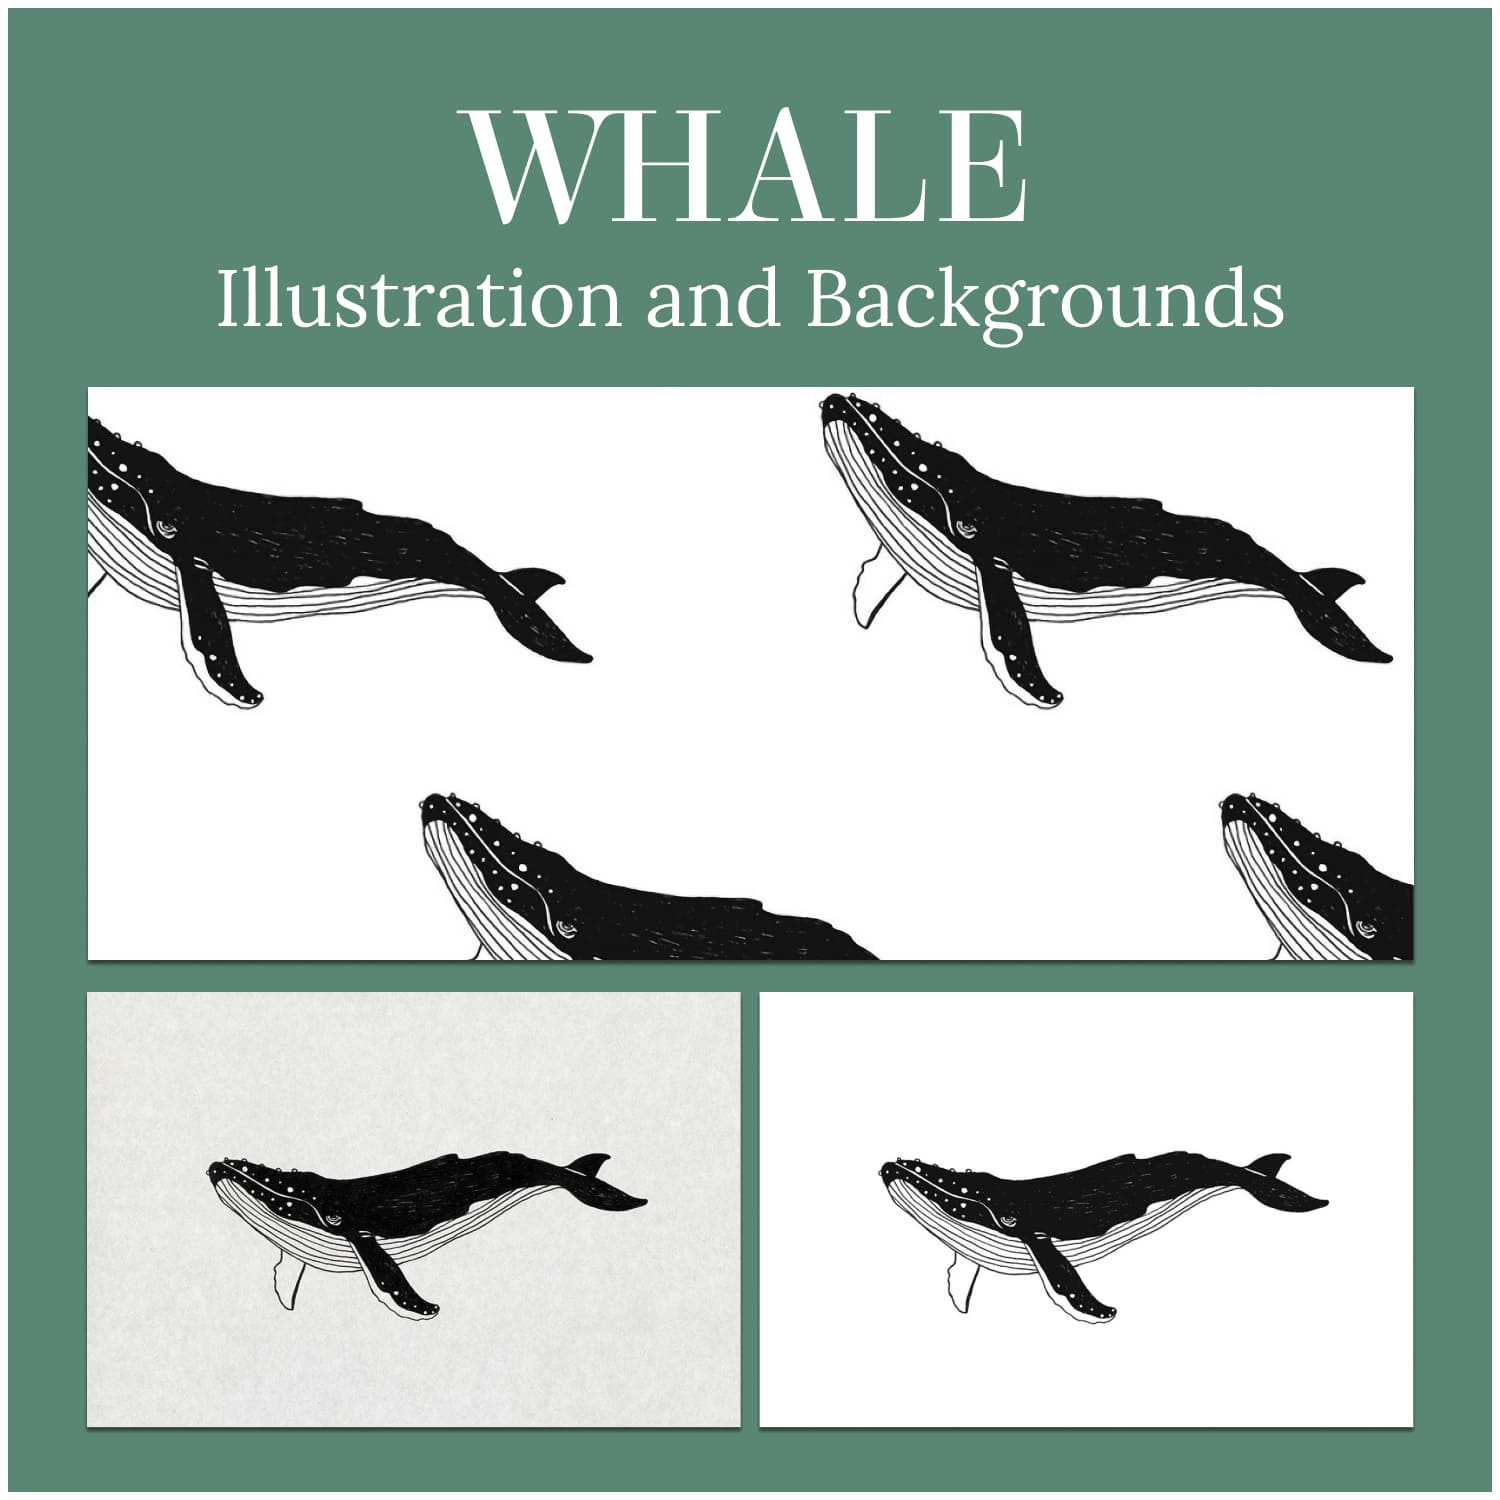 Whale Illustration and Backgrounds cover image.